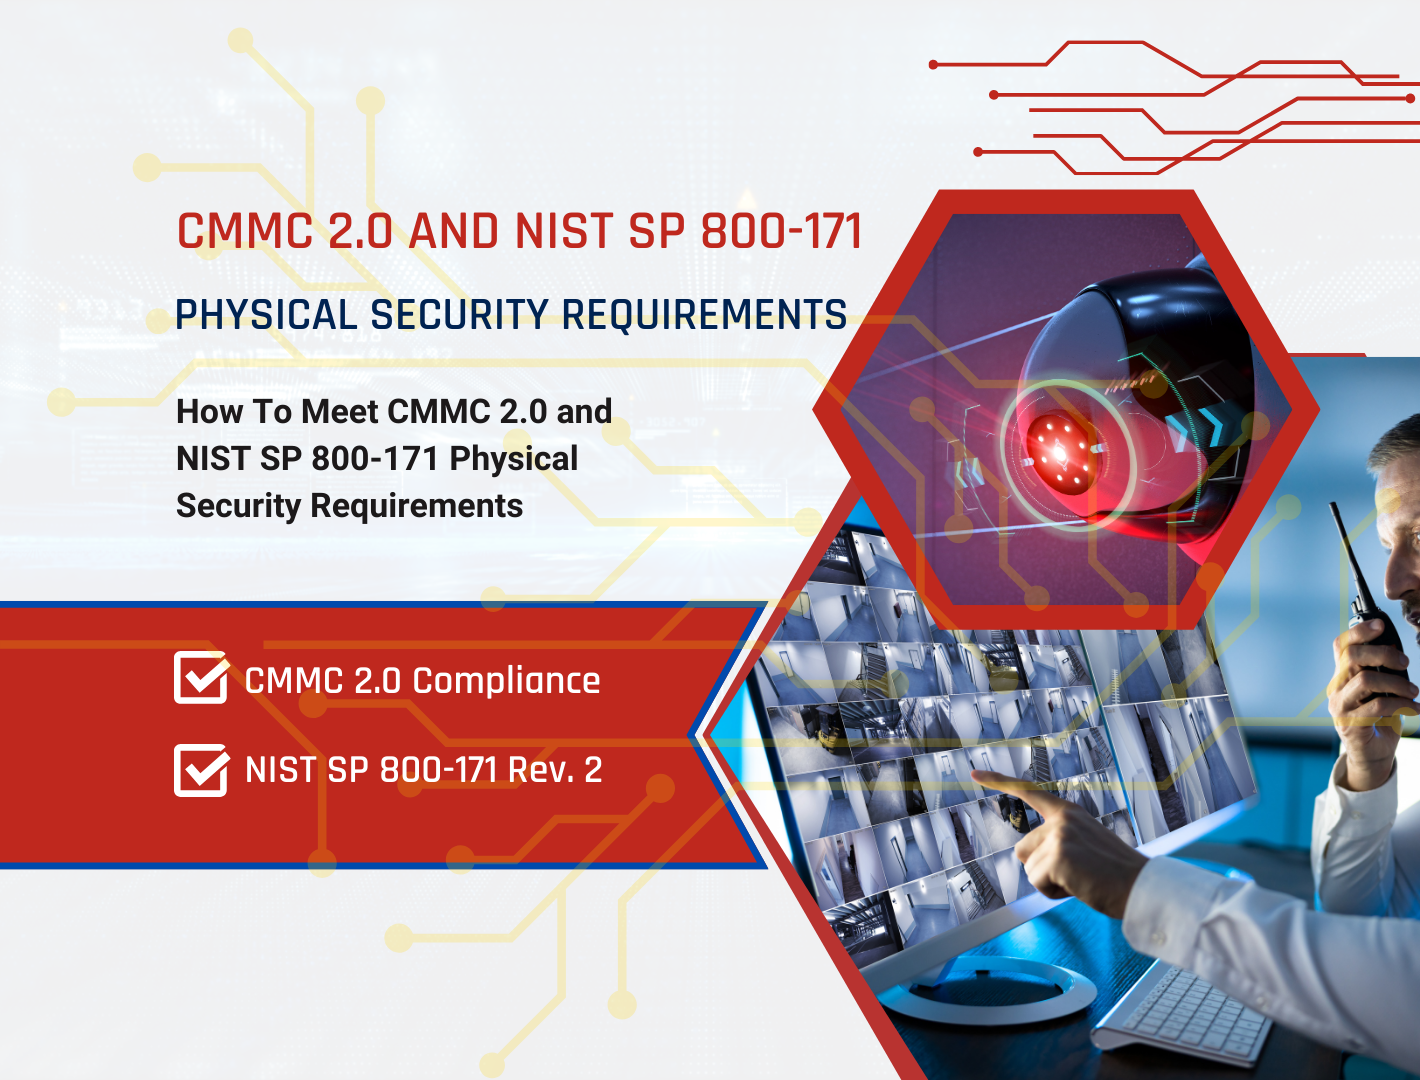 CMMC 2.0 and NIST SP 800-171 Physical Security Requirements for CUI